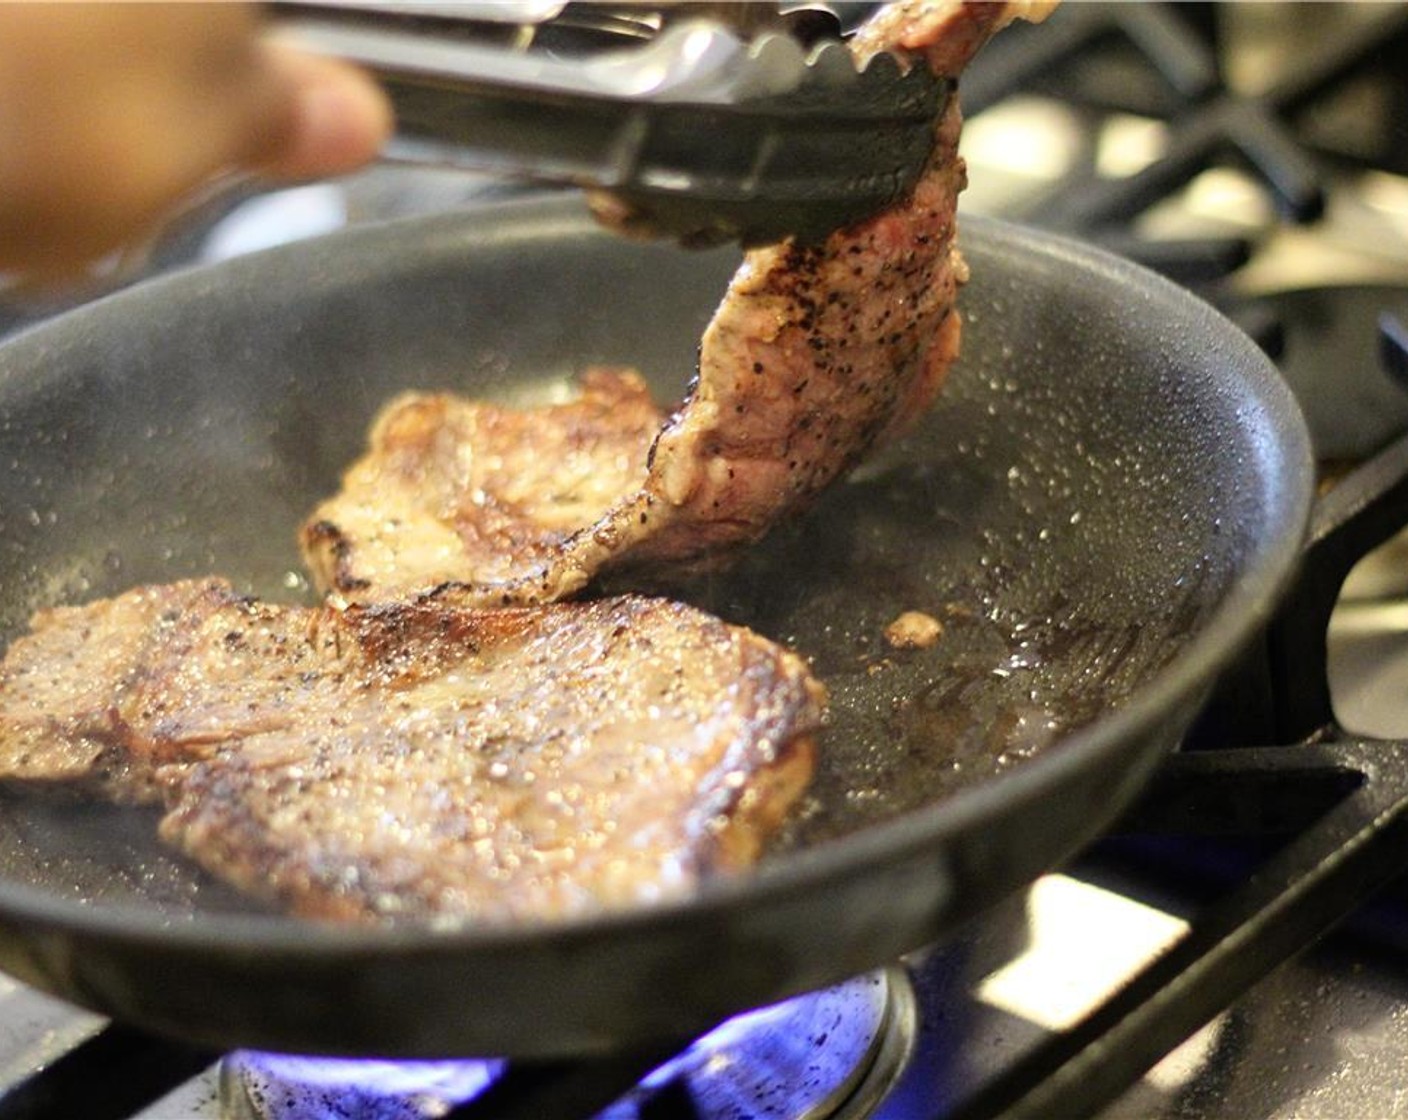 step 5 Cook each steak for 7-10 minutes for medium-rare to medium, or to the desired doneness, turning once. When steaks are done cooking, transfer steaks to a plate and cover to keep warm.